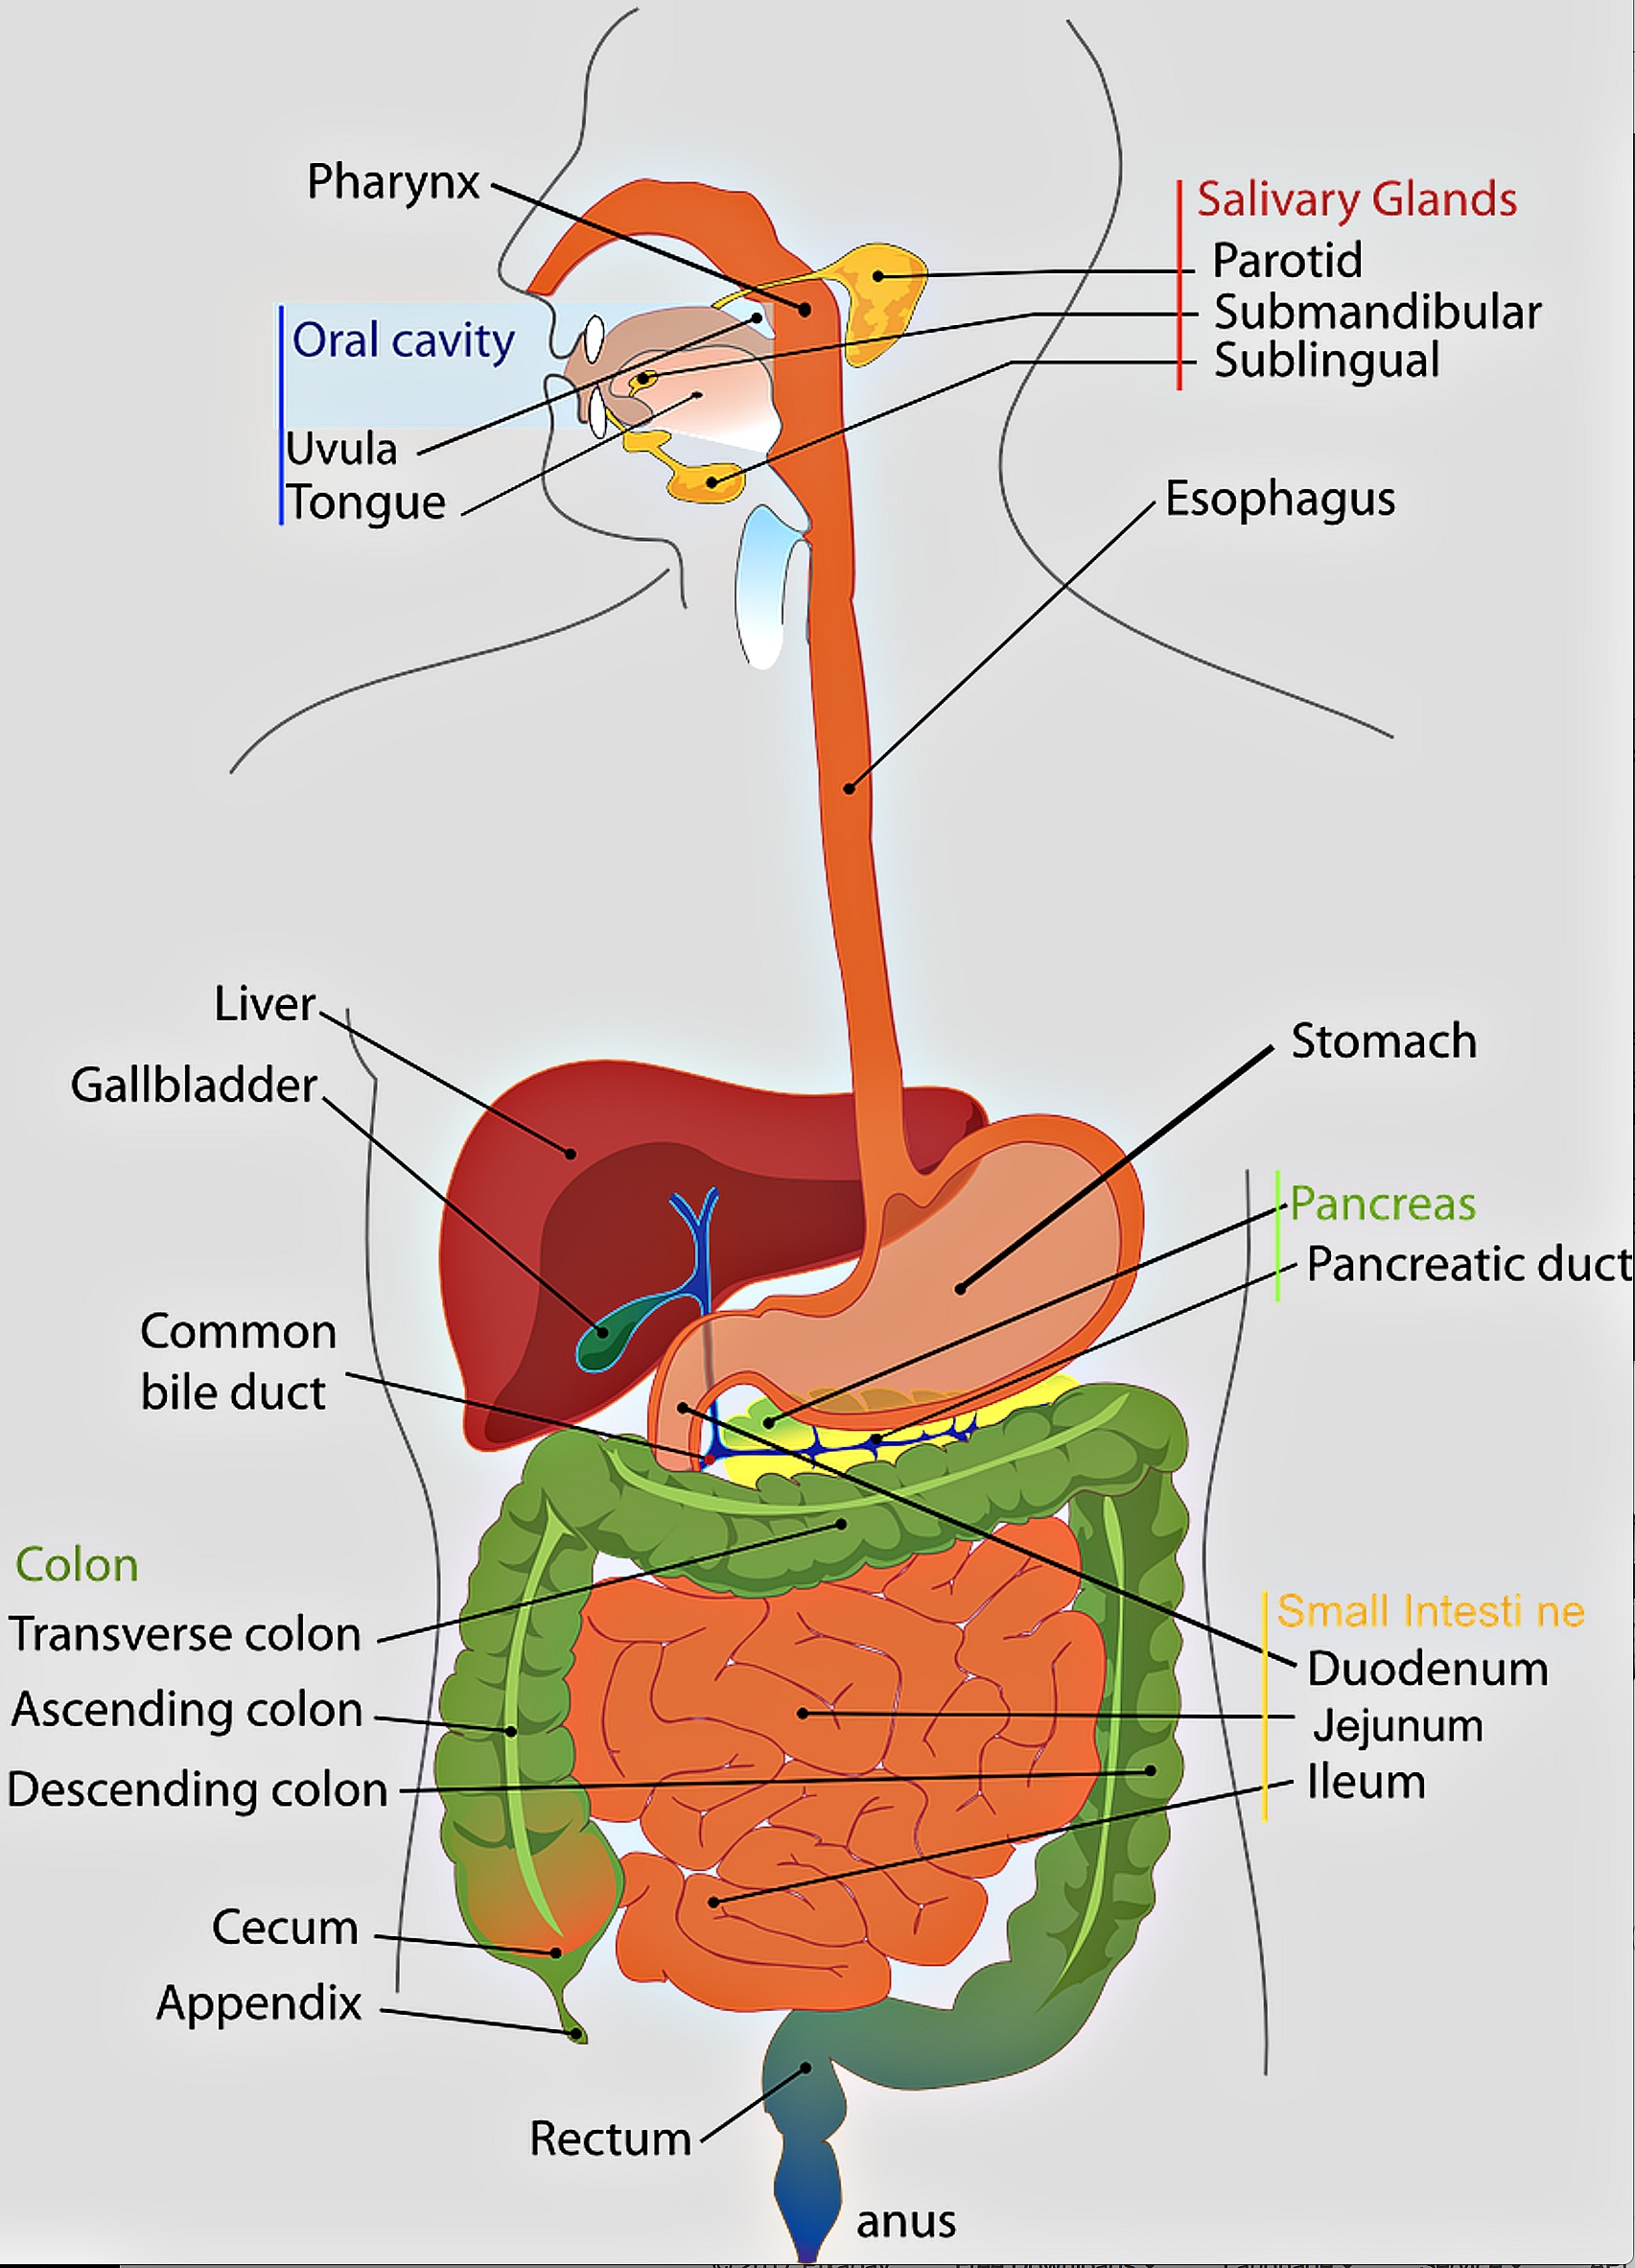 How does a HIDA scan work to diagnose gallbladder problems?